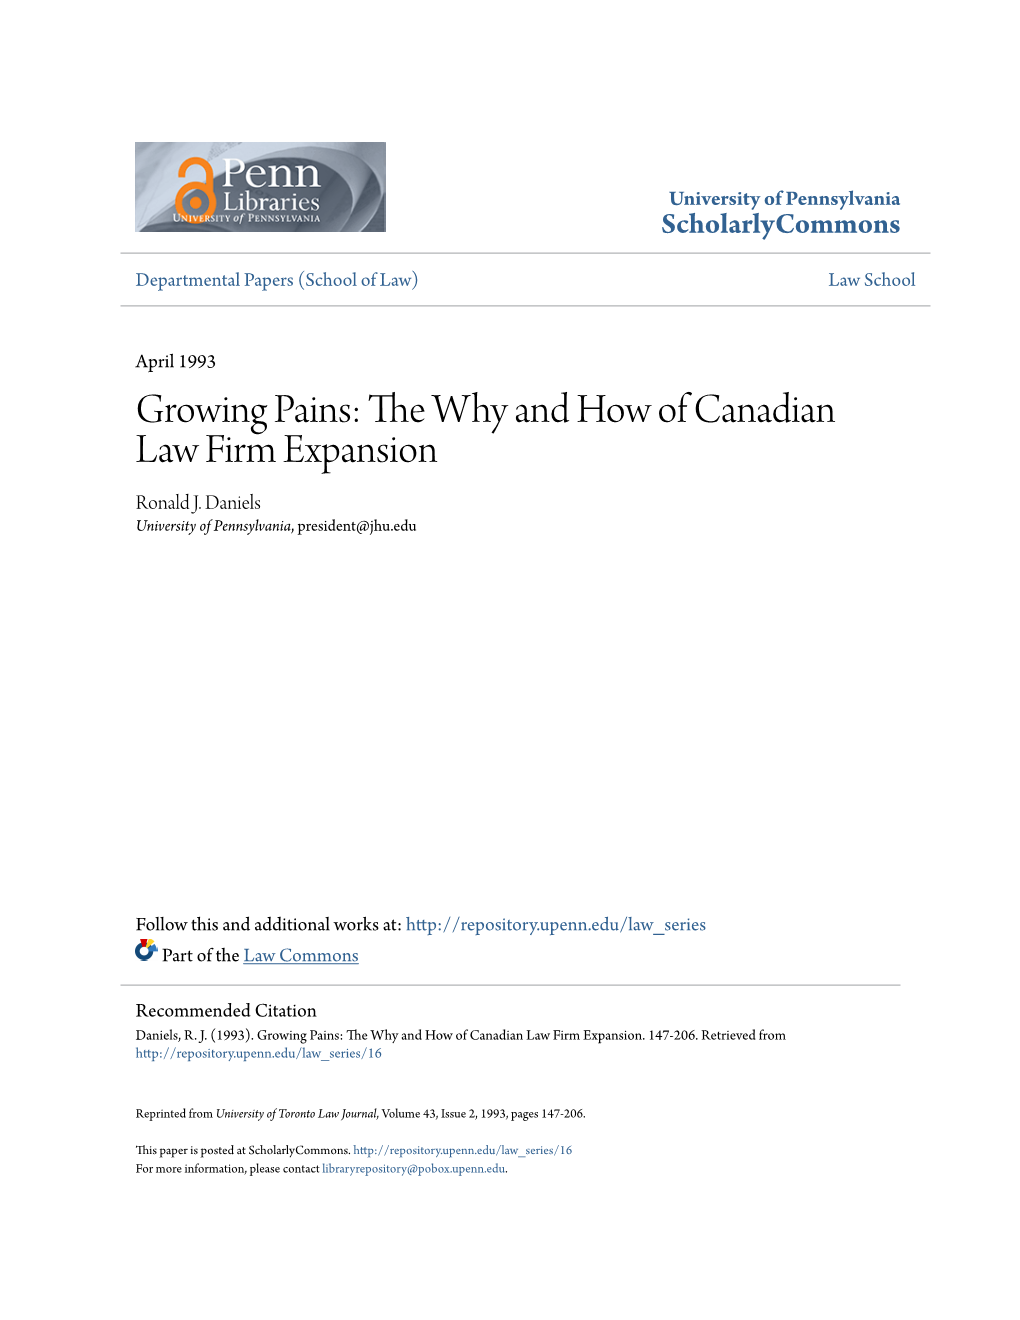 Growing Pains: the Why and How of Canadian Law Firm Expansion Ronald J